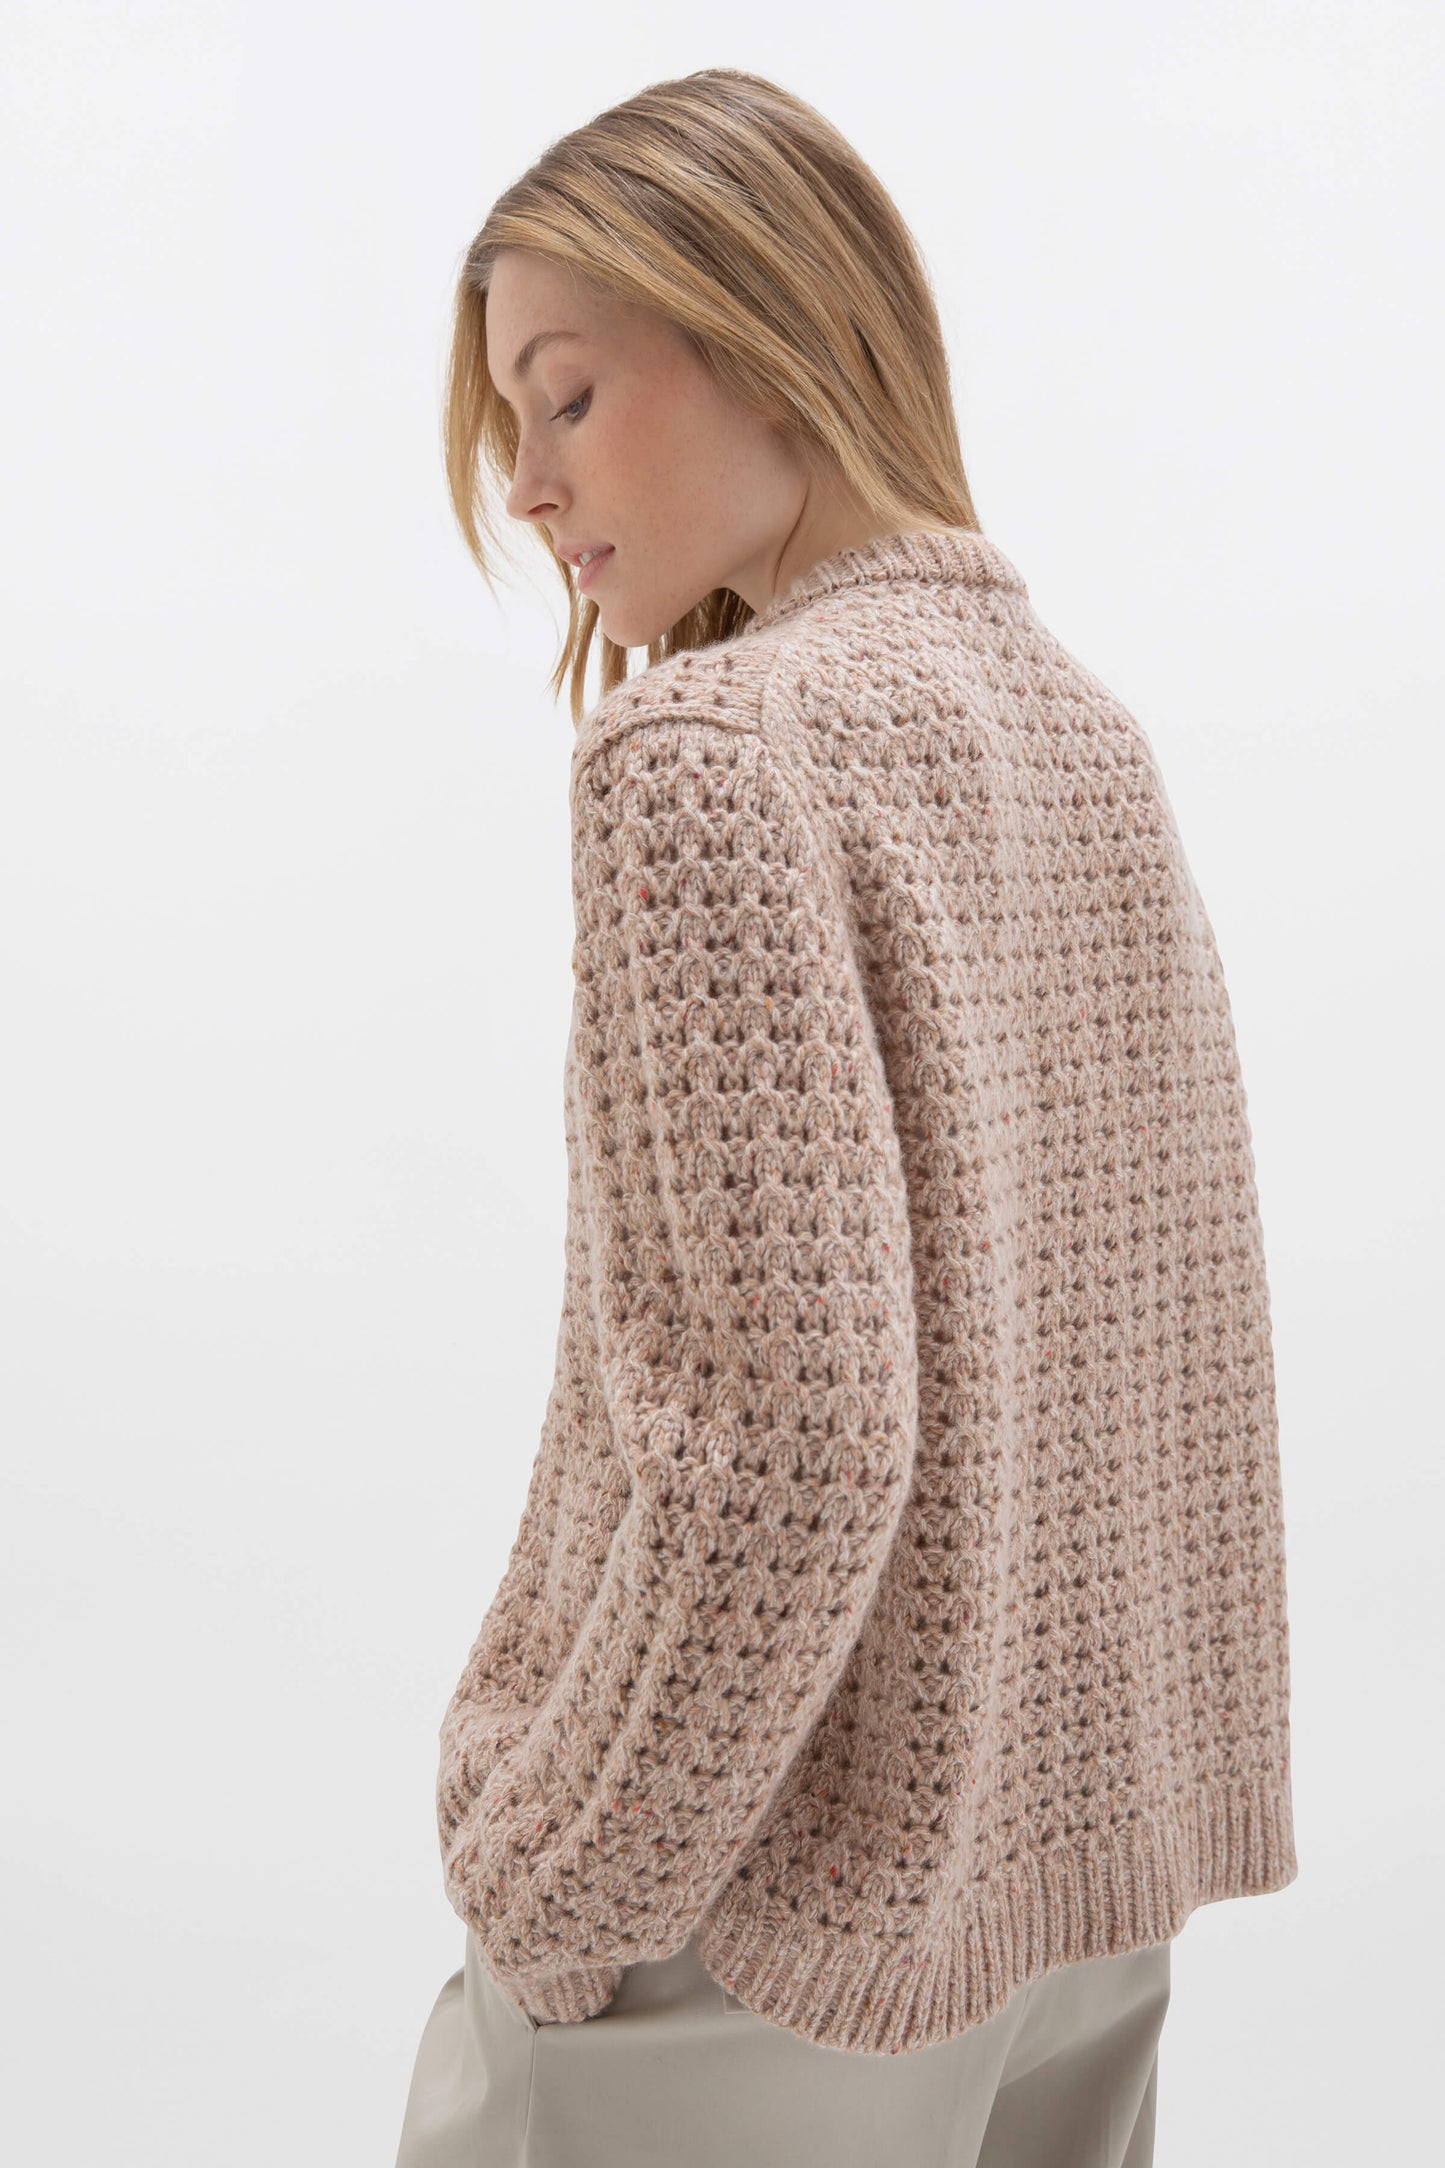 Johnstons of Elgin SS24 Women's Knitwear Camel Donegal Marl Crochet Stitch Donegal Cashmere Cardigan KAB05215004610